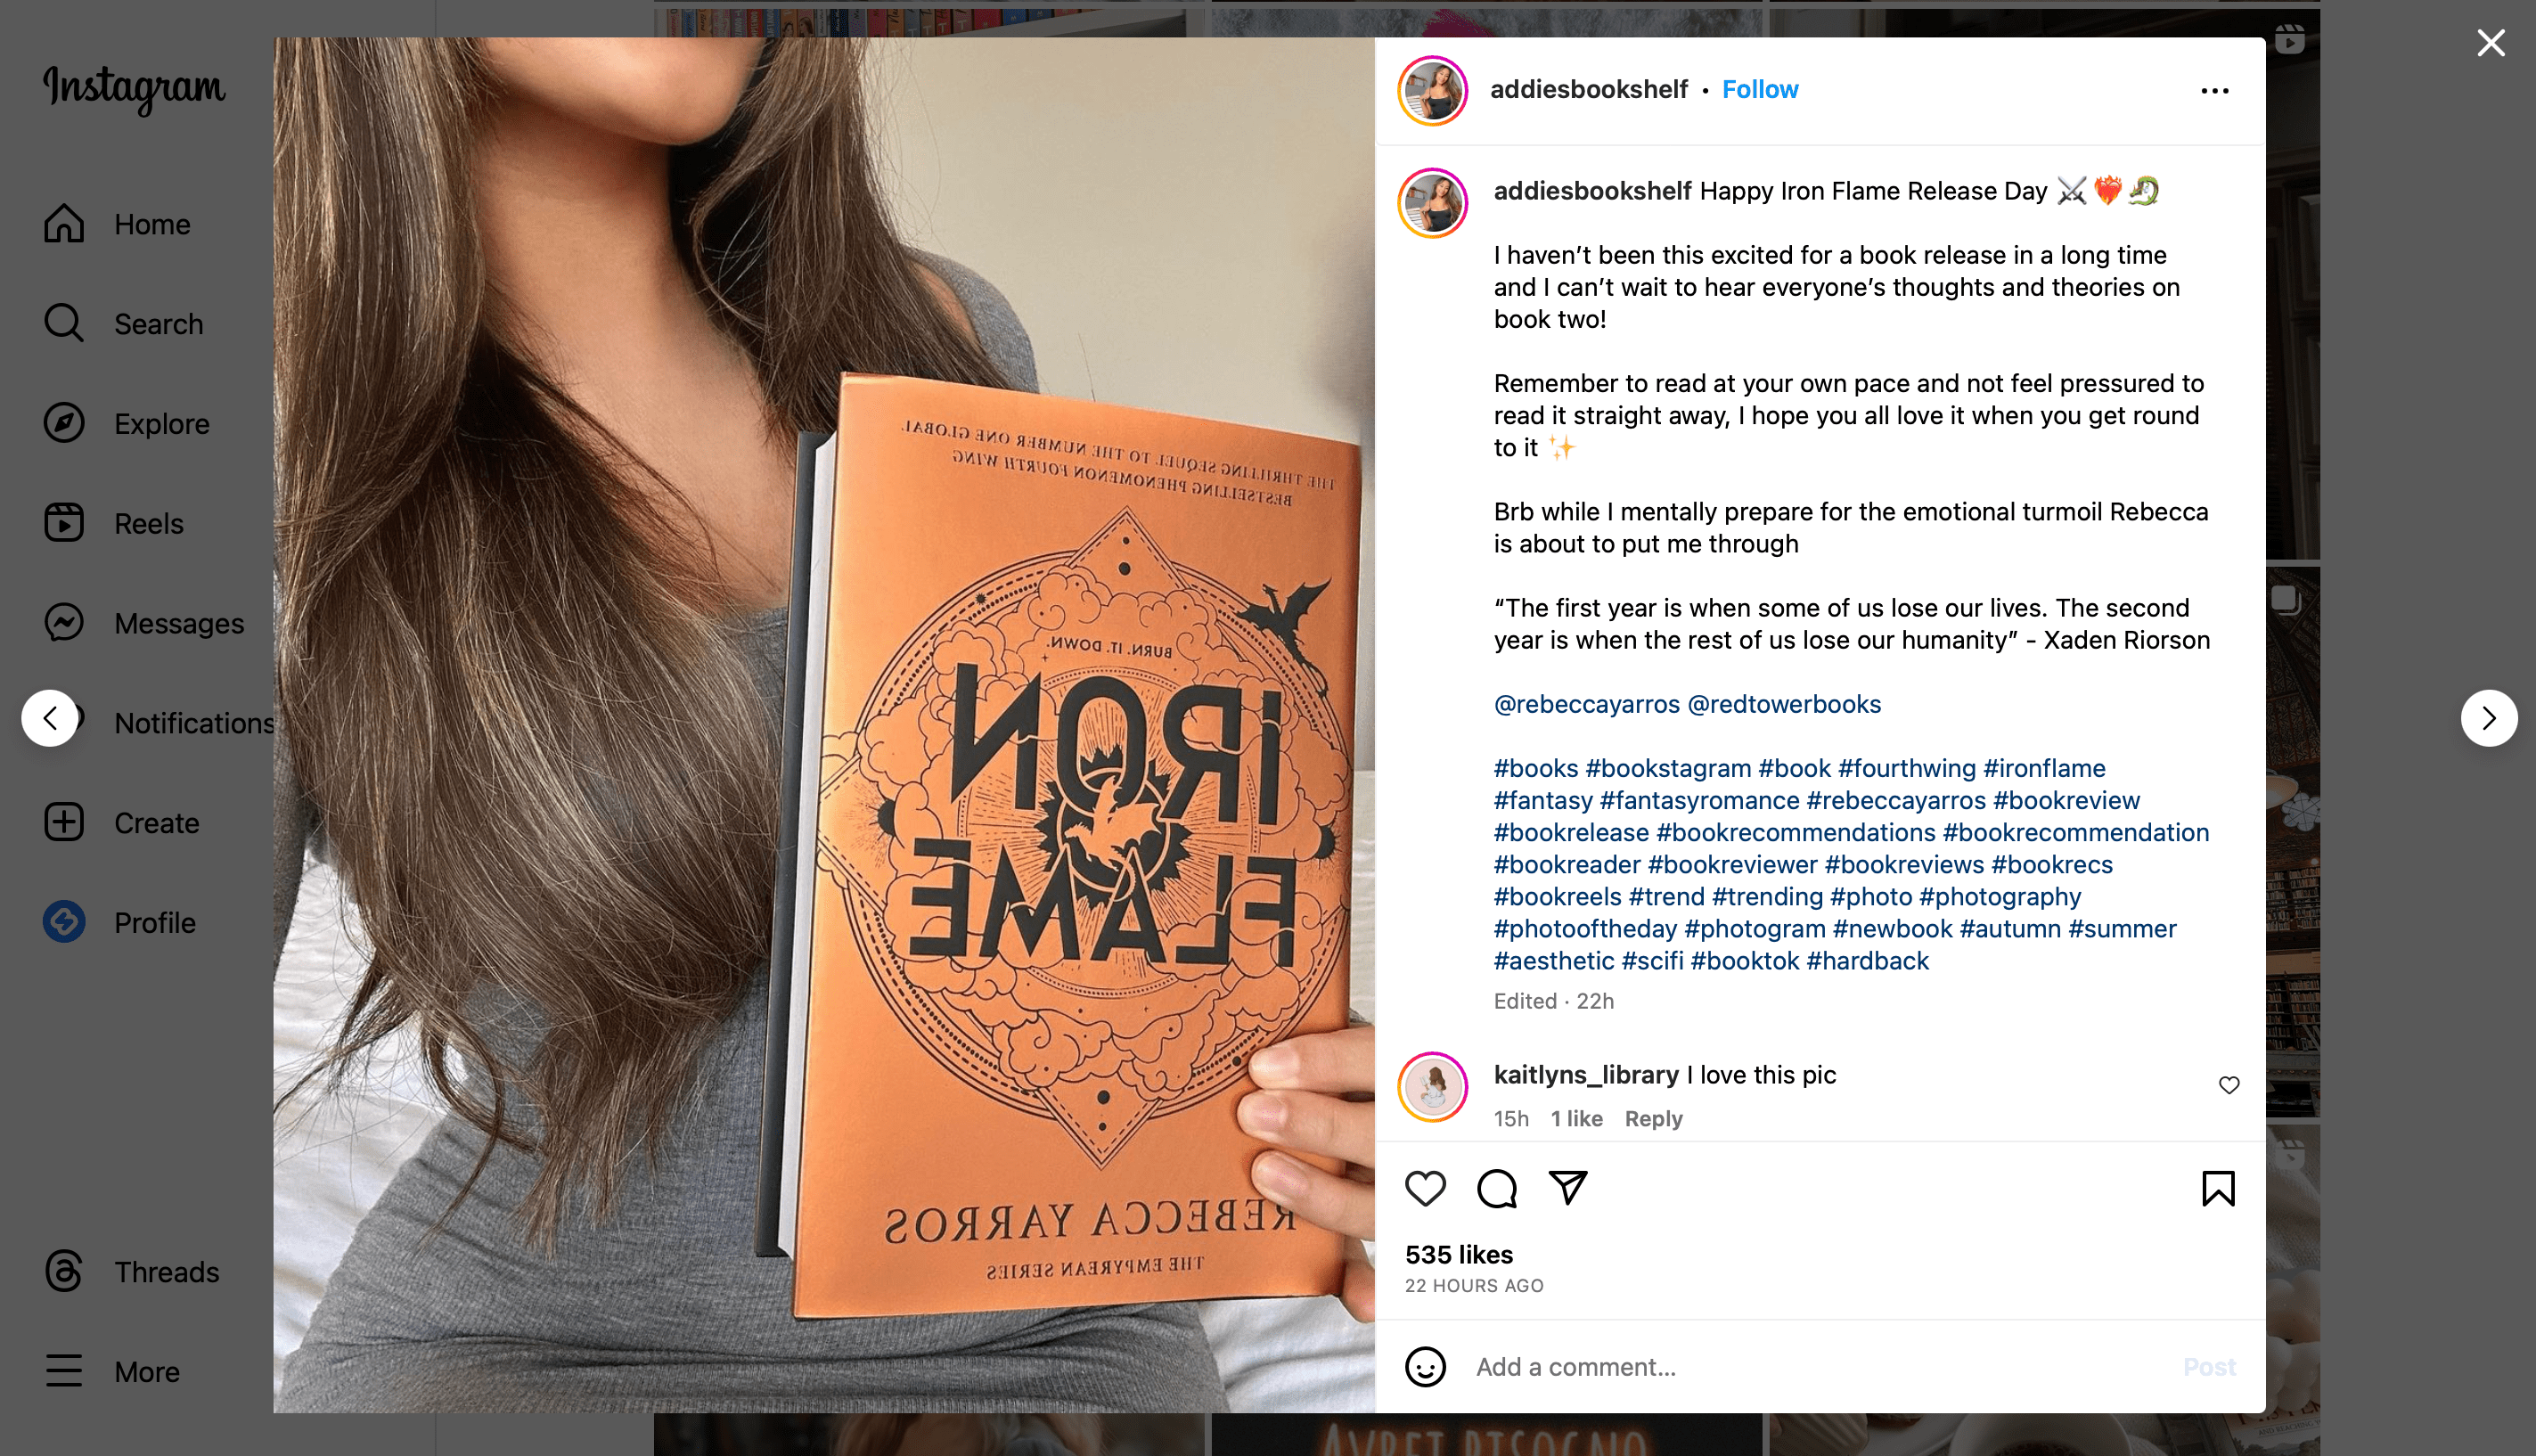 An example of an influencer's post about a upcoming book